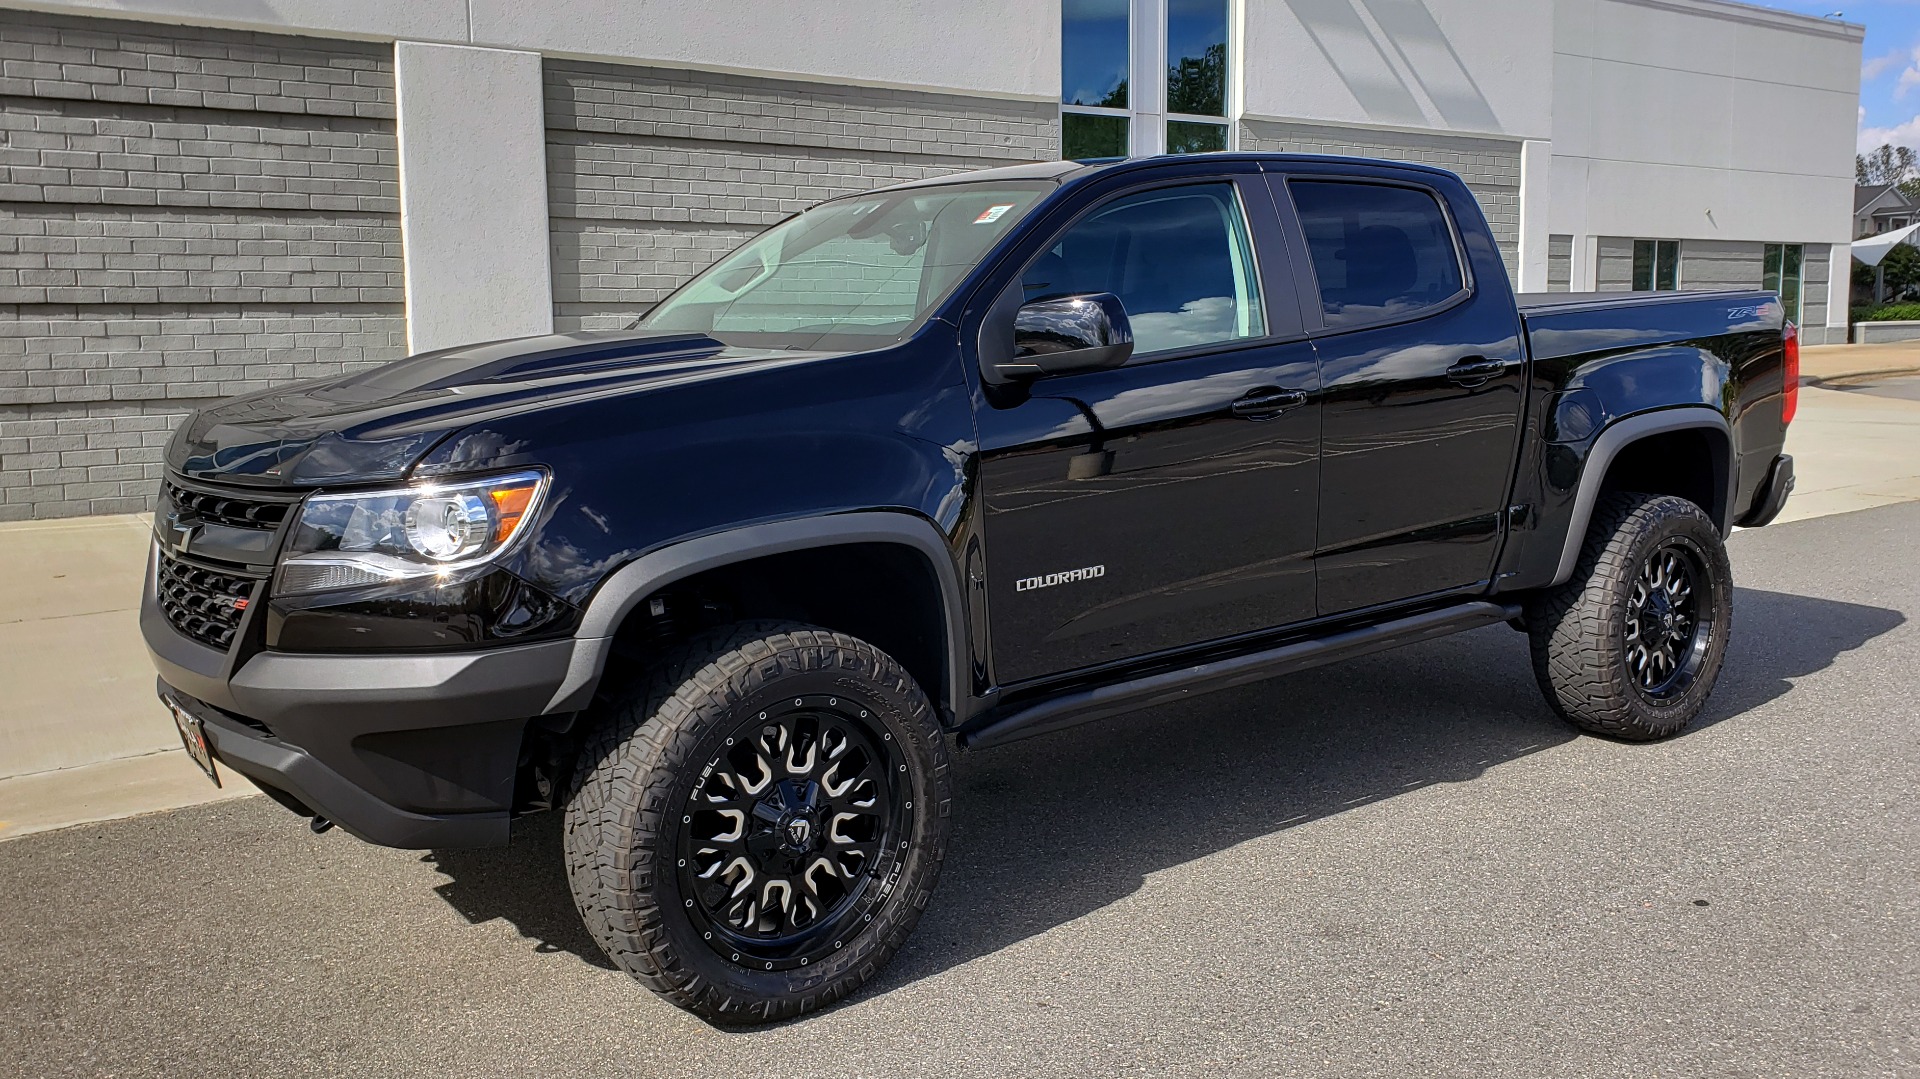 Used 2019 Chevrolet COLORADO 4WD ZR2 / 3.6L V6 / 8-SPD AUTO / CREWCAB / LEATHER / BOSE / REARVIEW for sale Sold at Formula Imports in Charlotte NC 28227 1